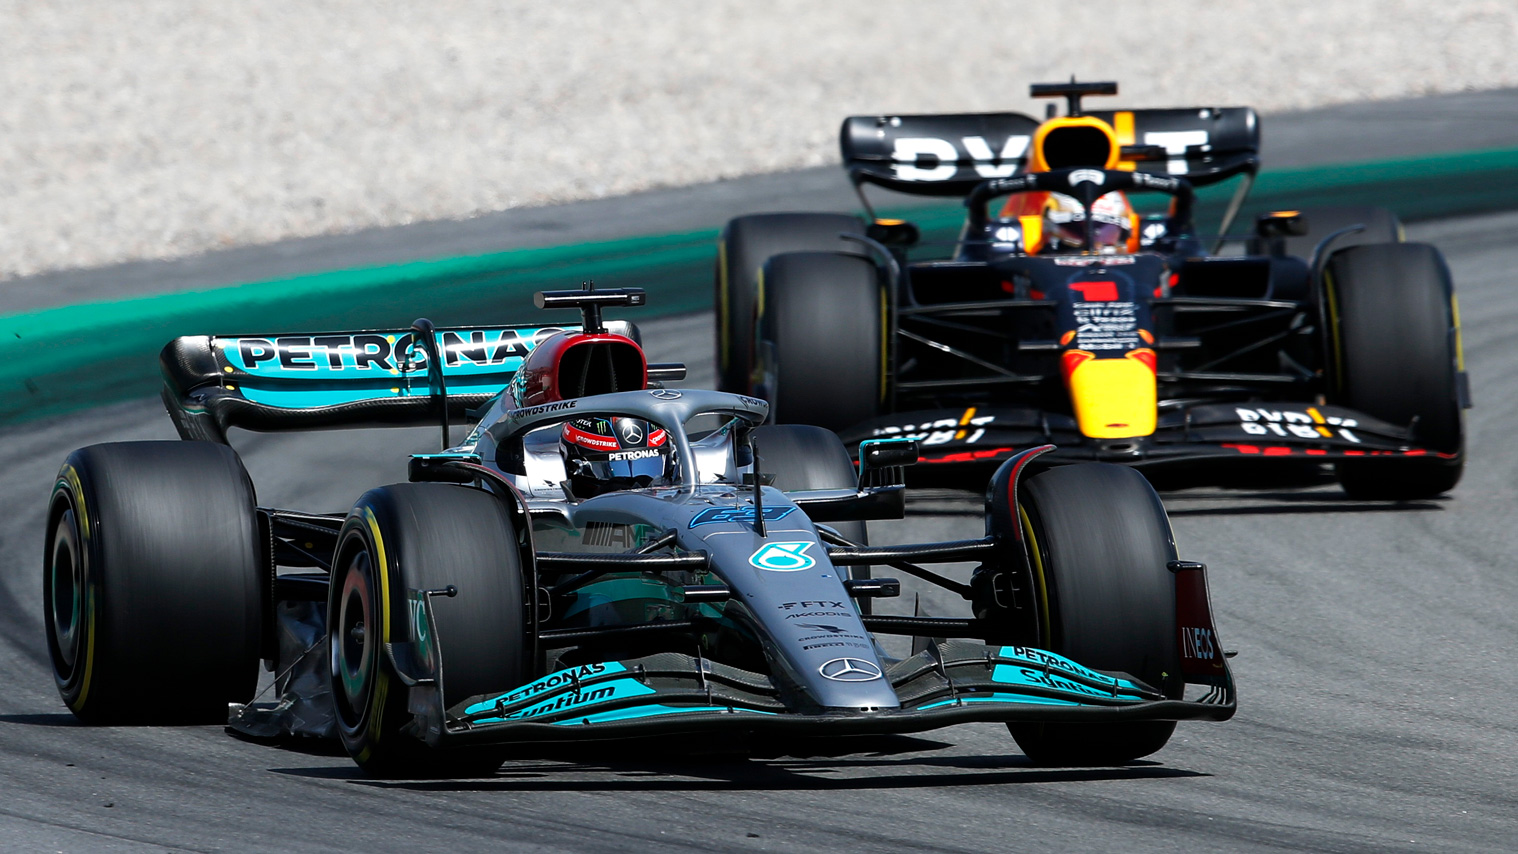 F1: after Russell's sensational defence and Hamilton's pace, are Mercedes back?